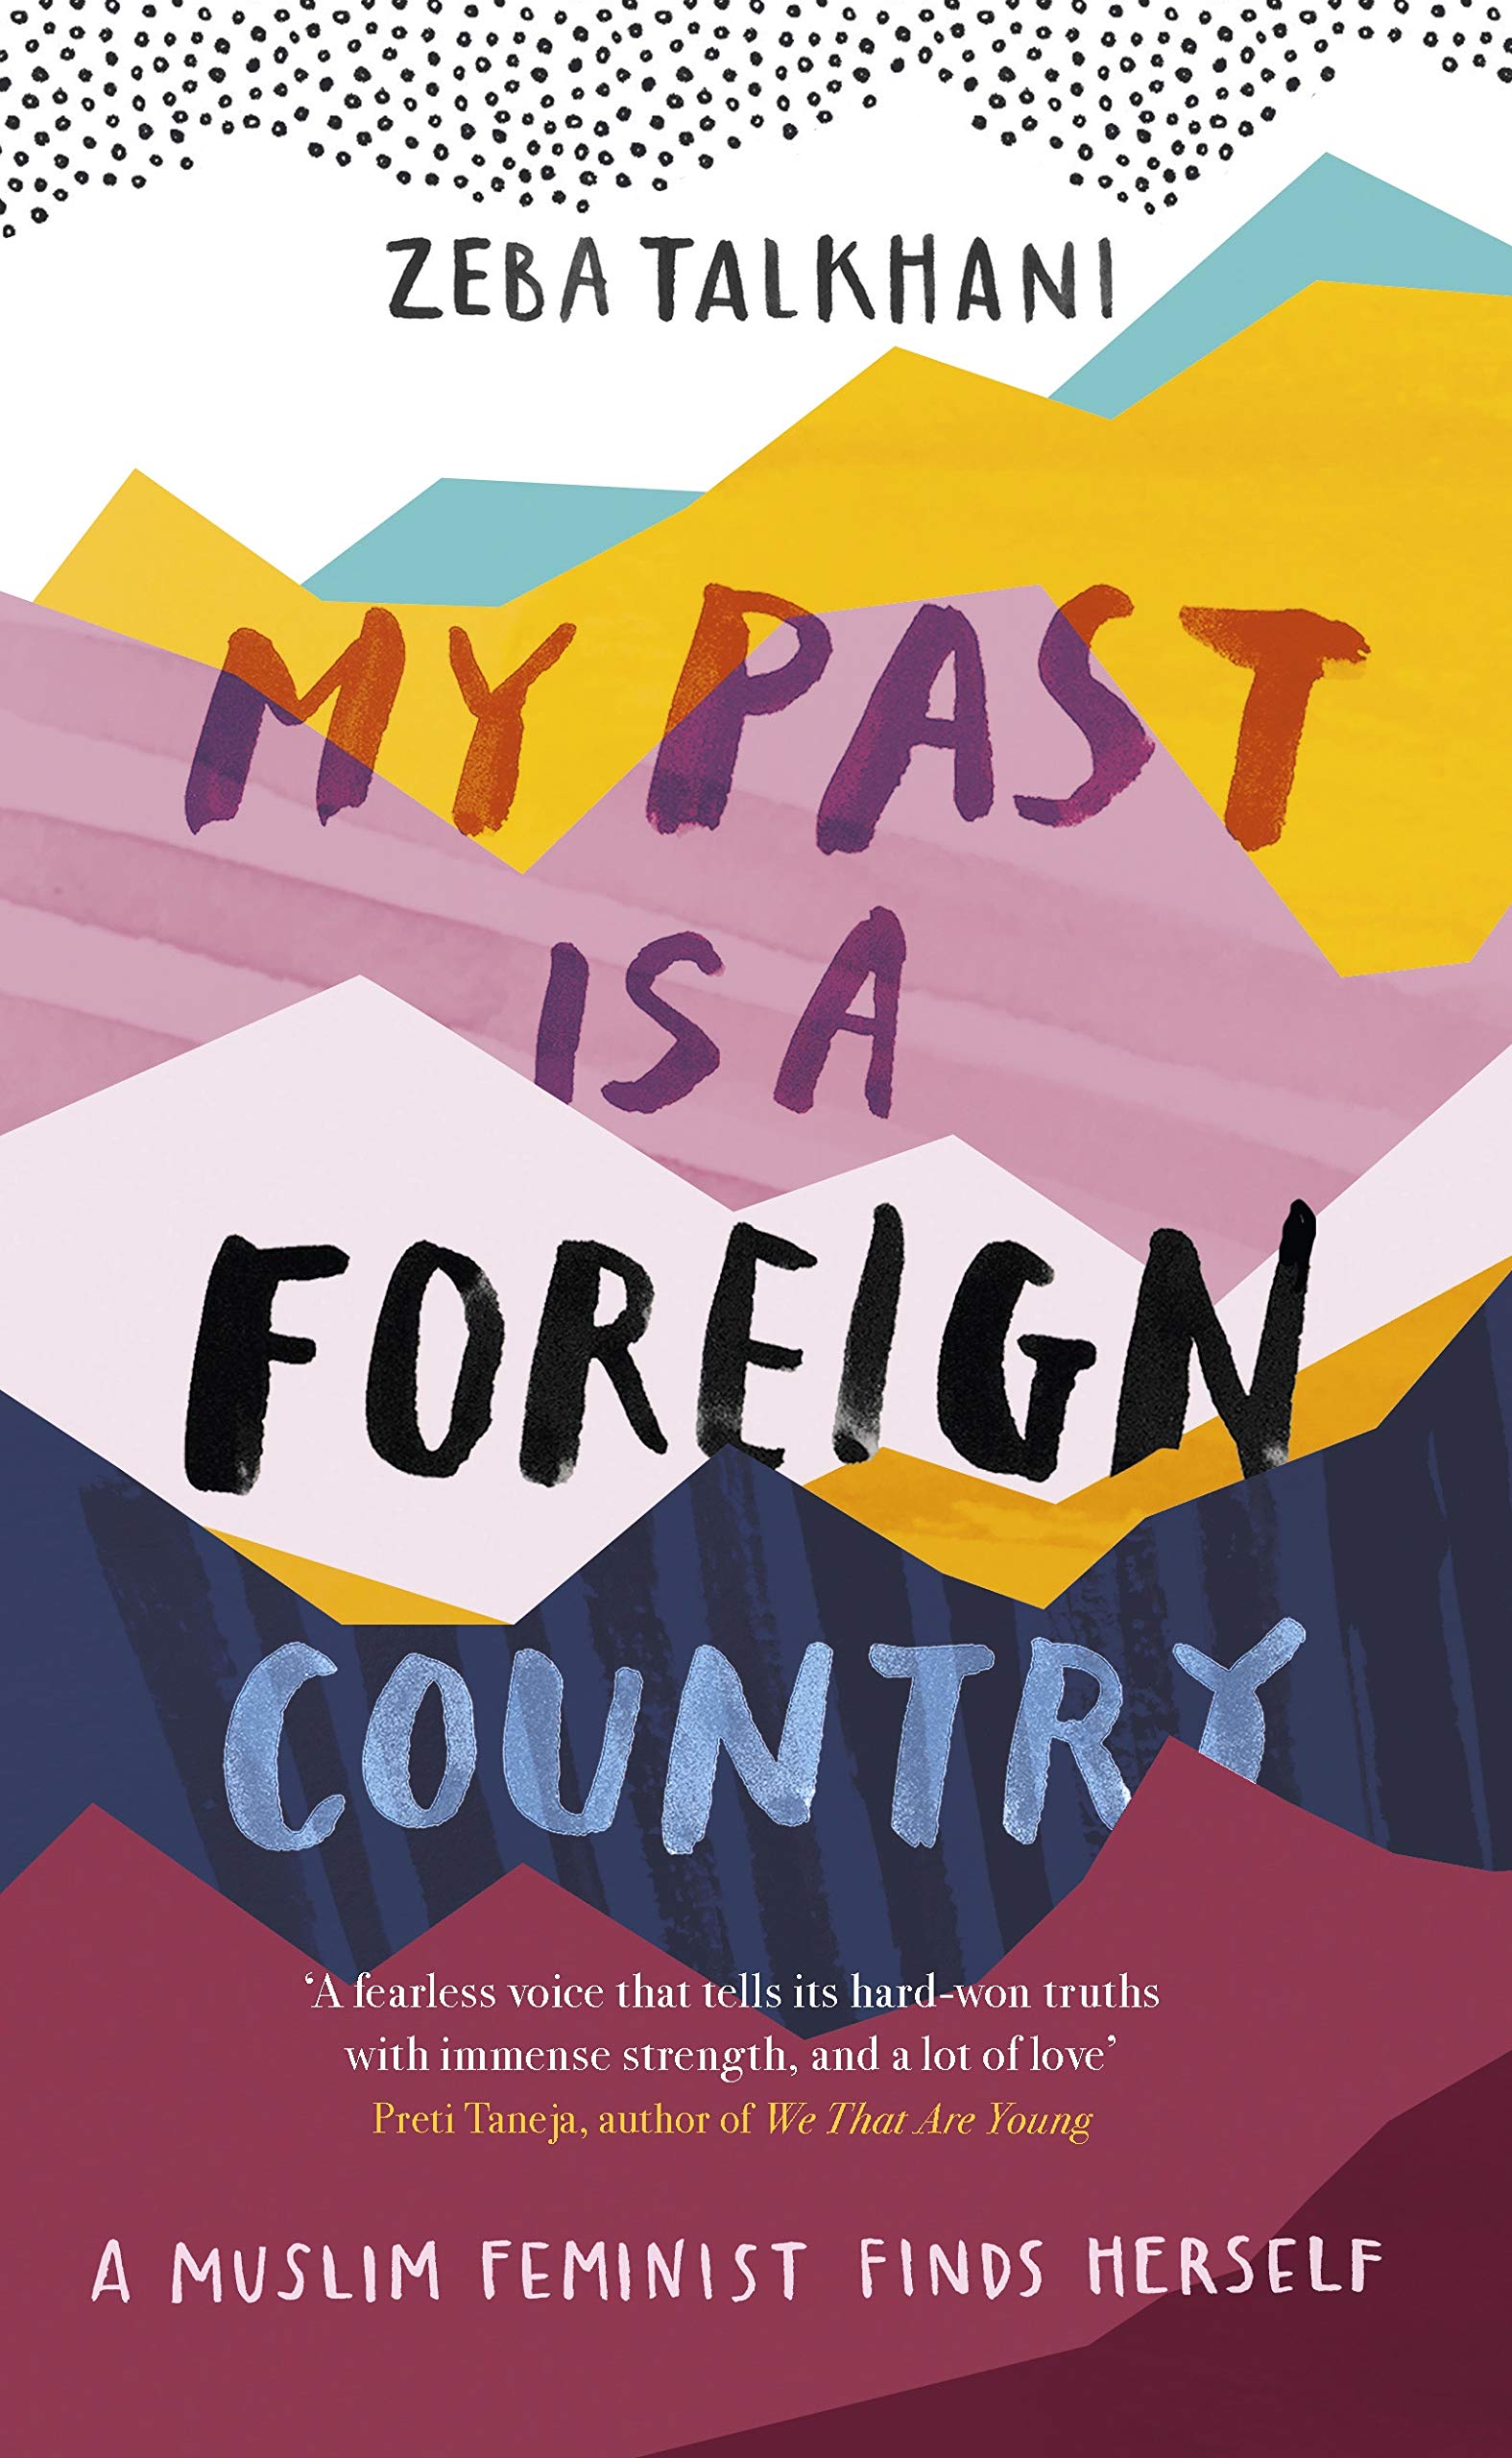 My Past Is A Foreign Country | Zeba Talkhani